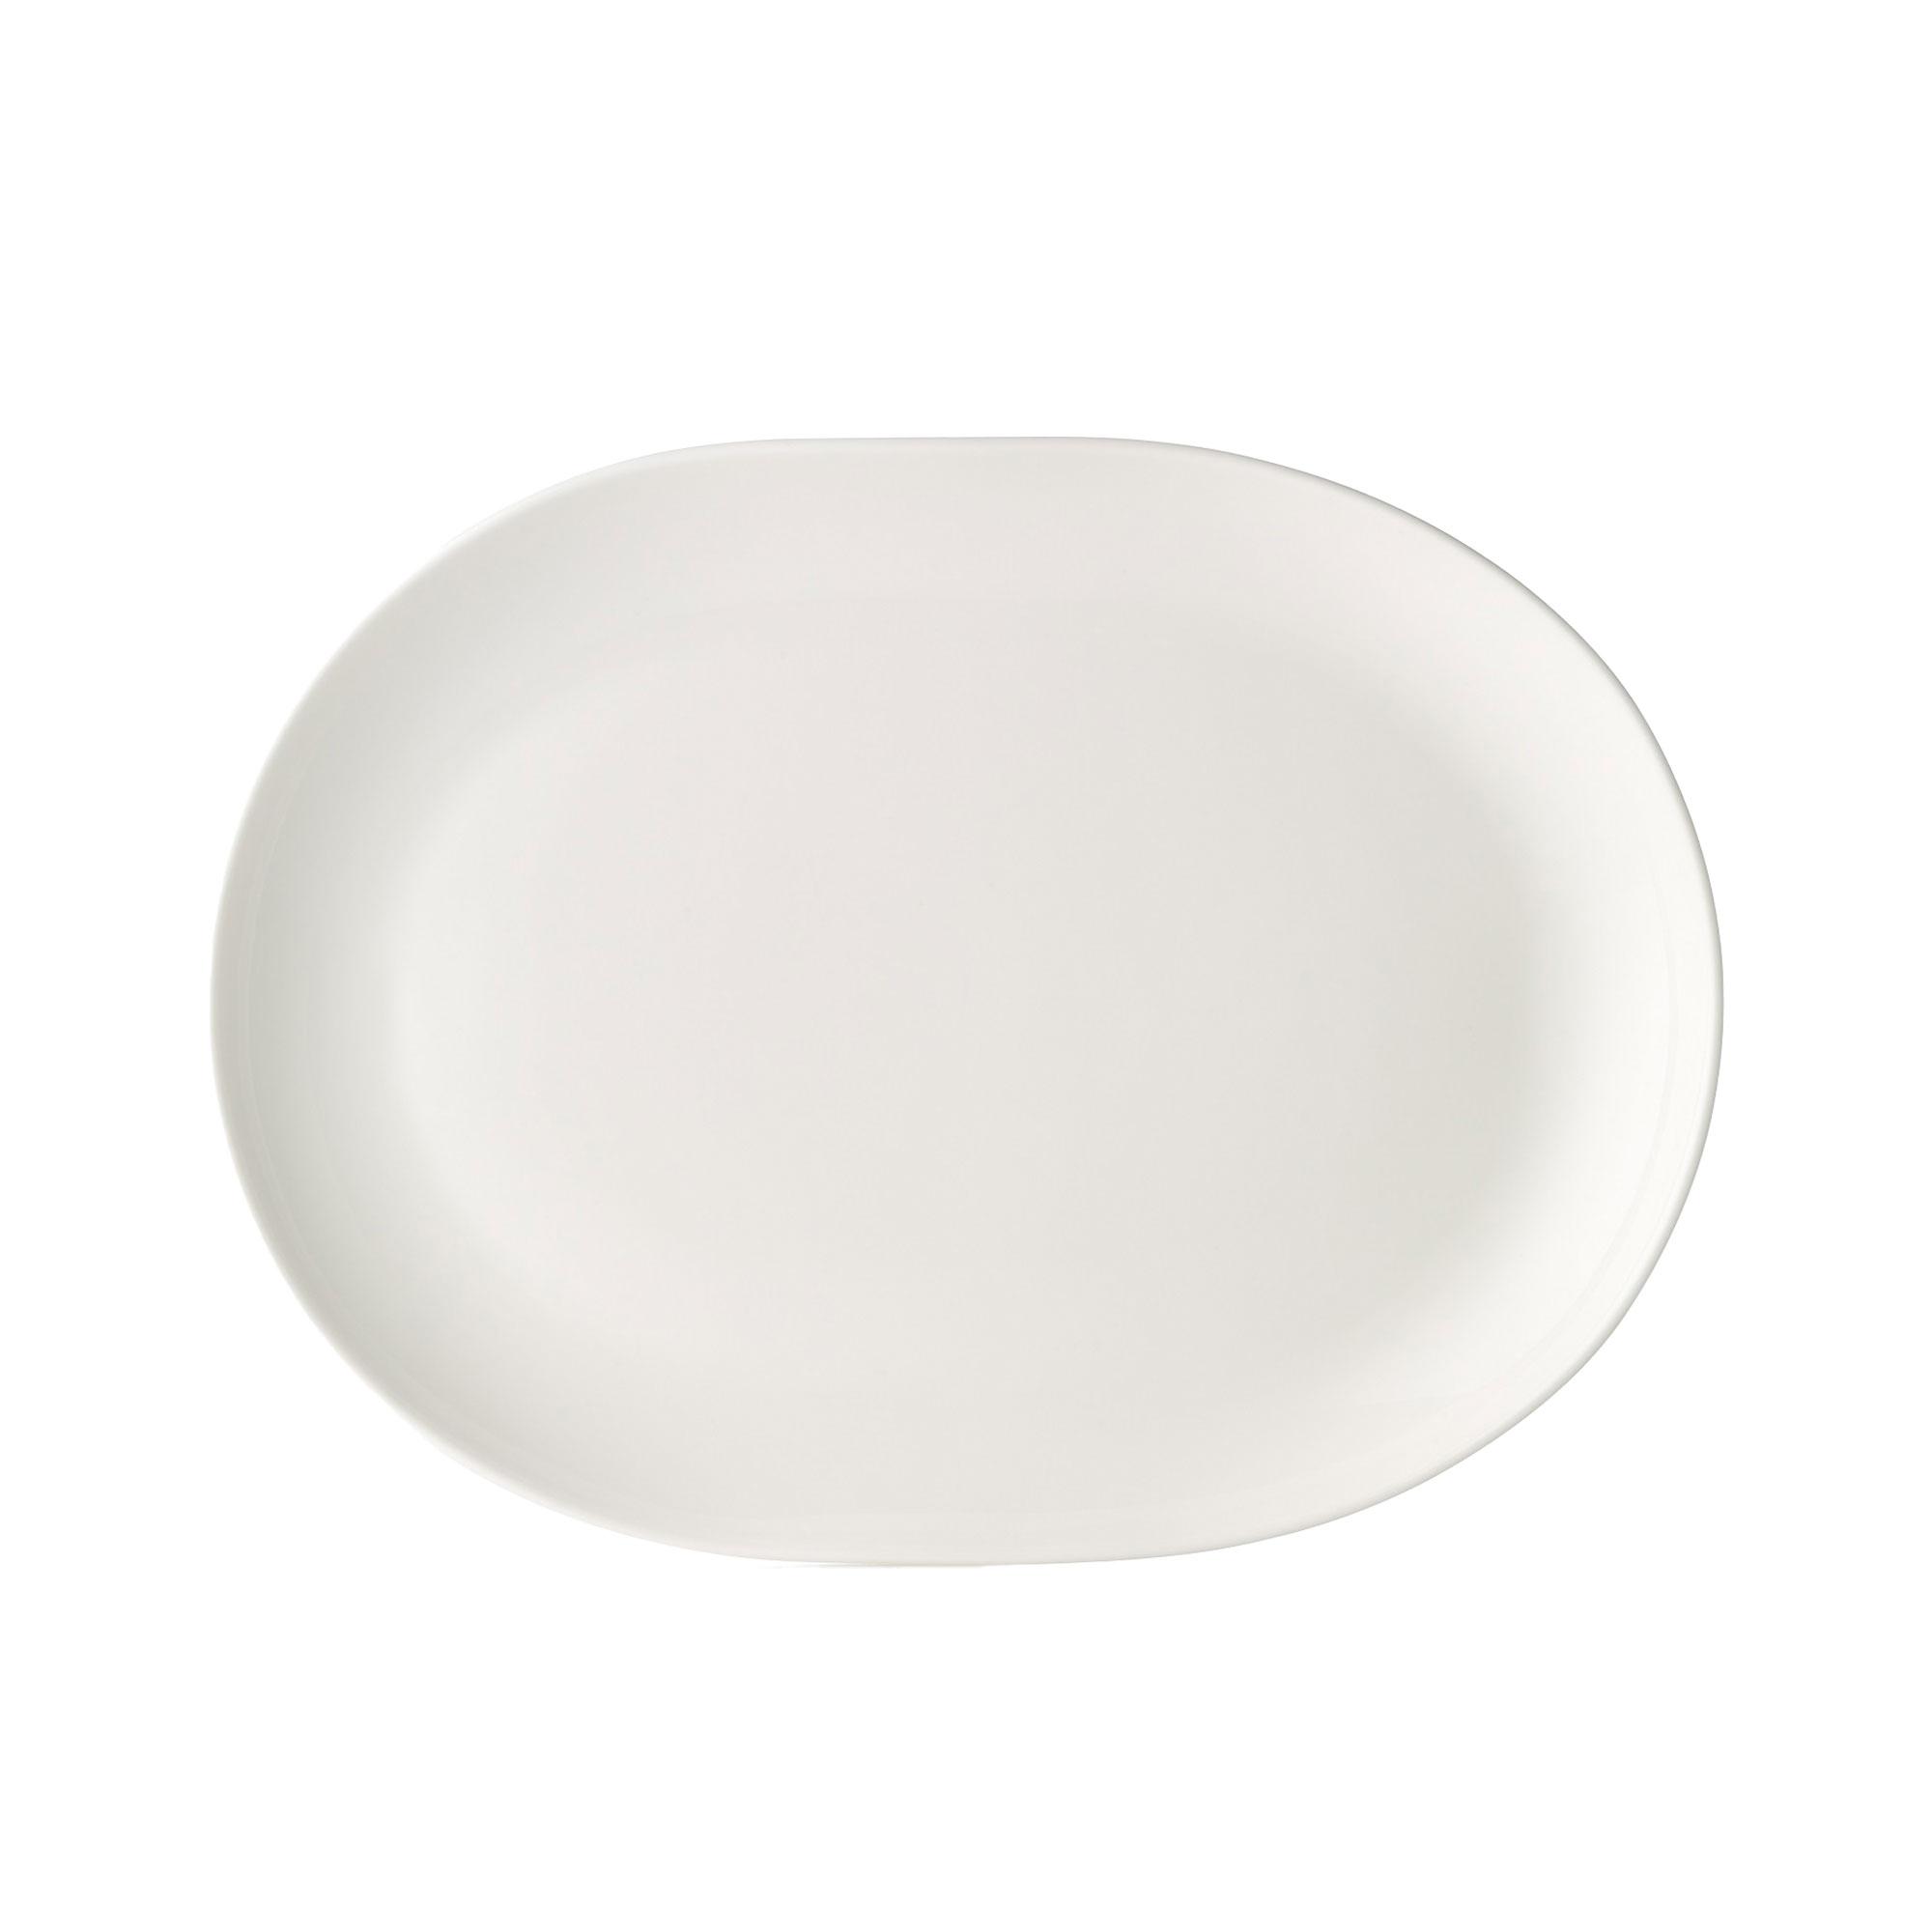 Noritake Everyday by Adam Liaw Oblong Serving Platter 25cm White Image 4